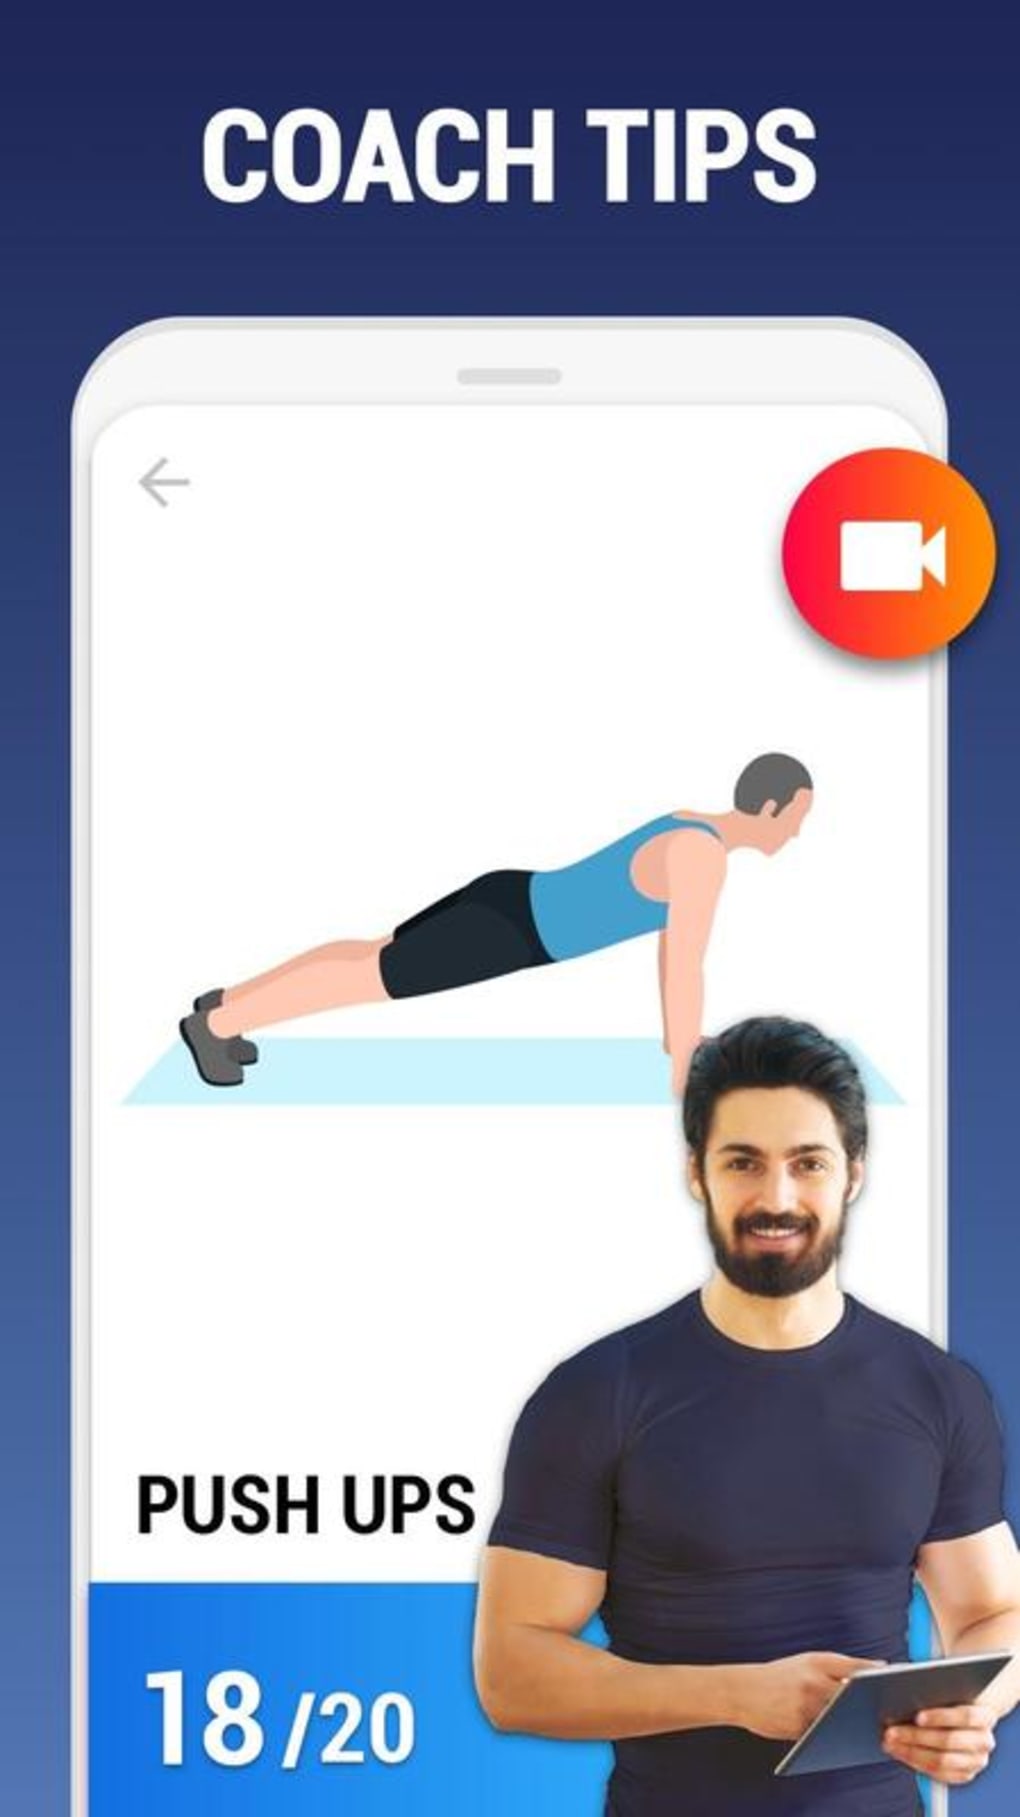 5 Day Home Workout Without Equipment App For Pc for Build Muscle